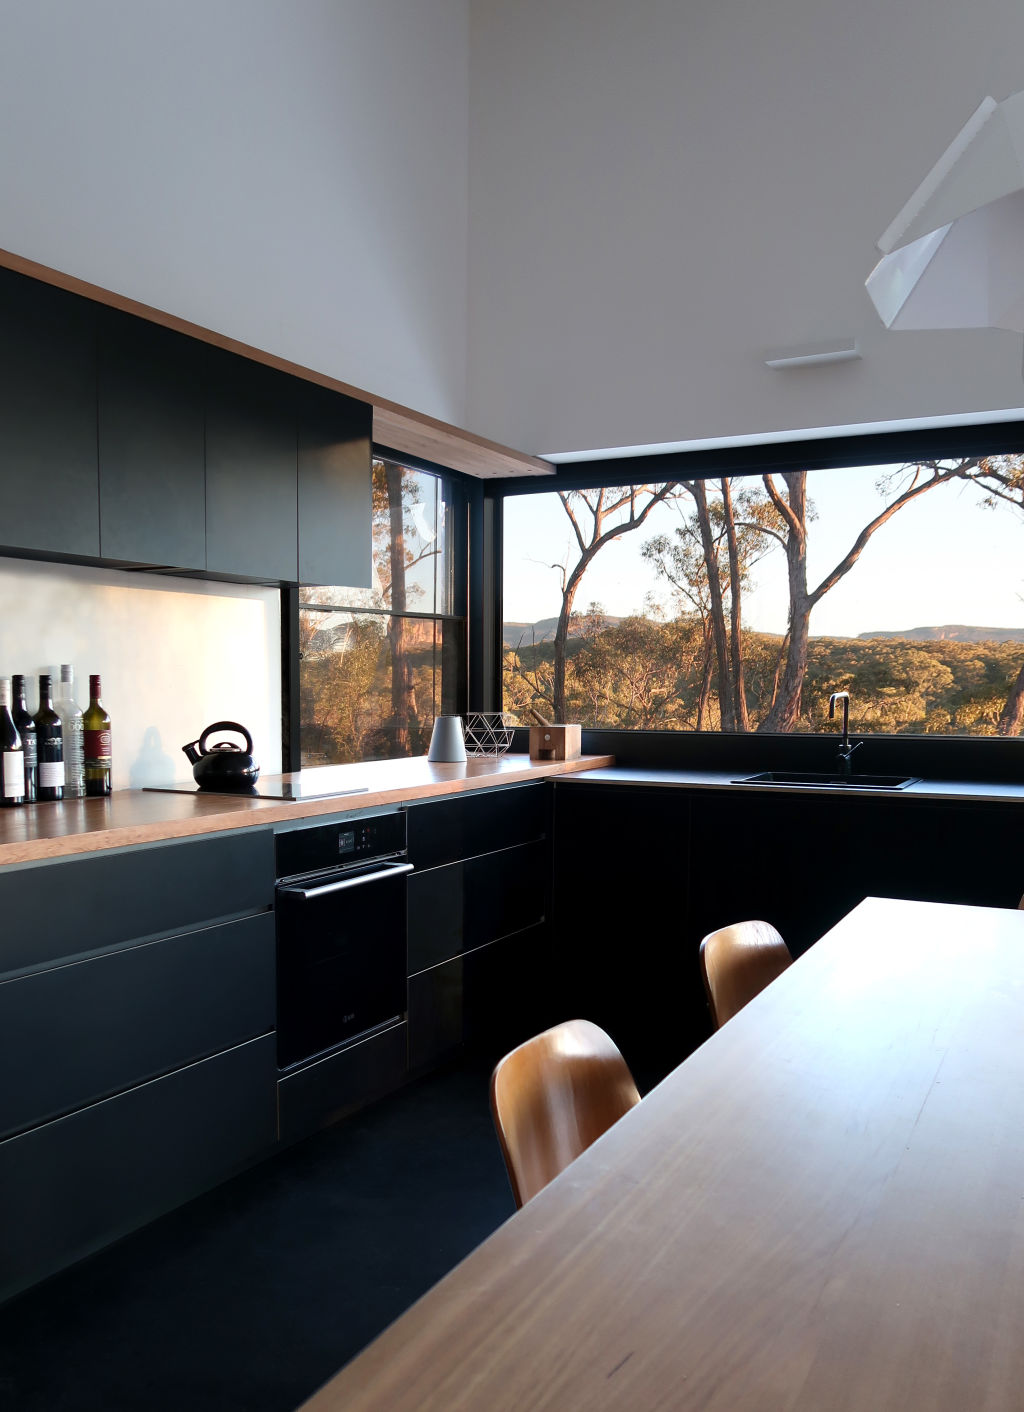 Simon Anderson’s Off-Grid Cabin in the Blue Mountains. Photo: Supplied